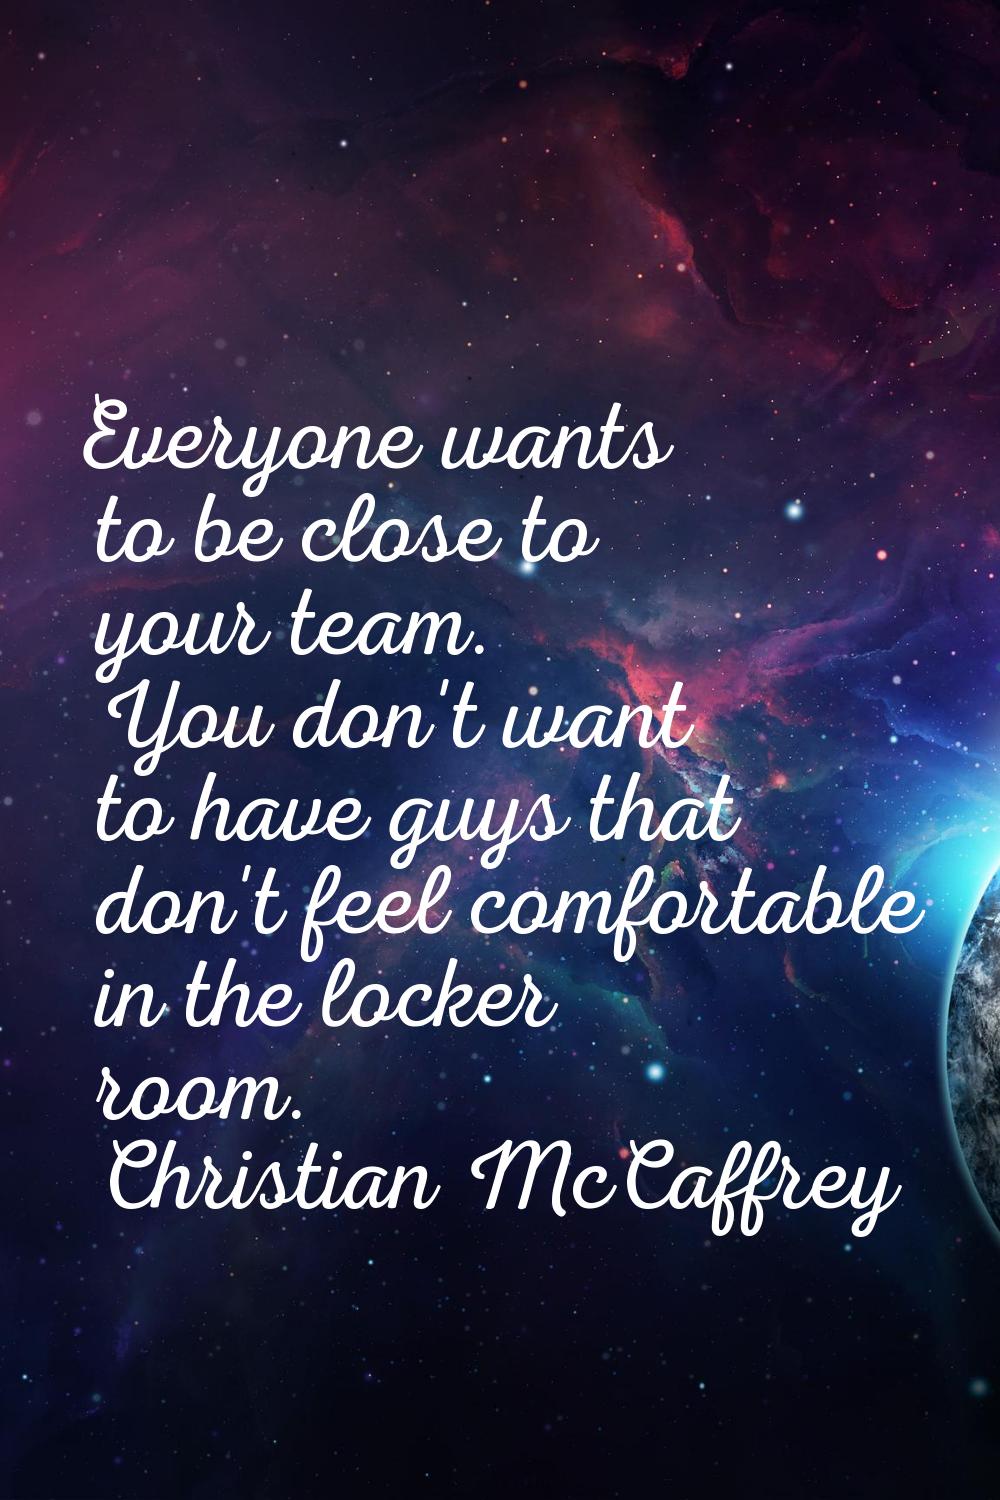 Everyone wants to be close to your team. You don't want to have guys that don't feel comfortable in